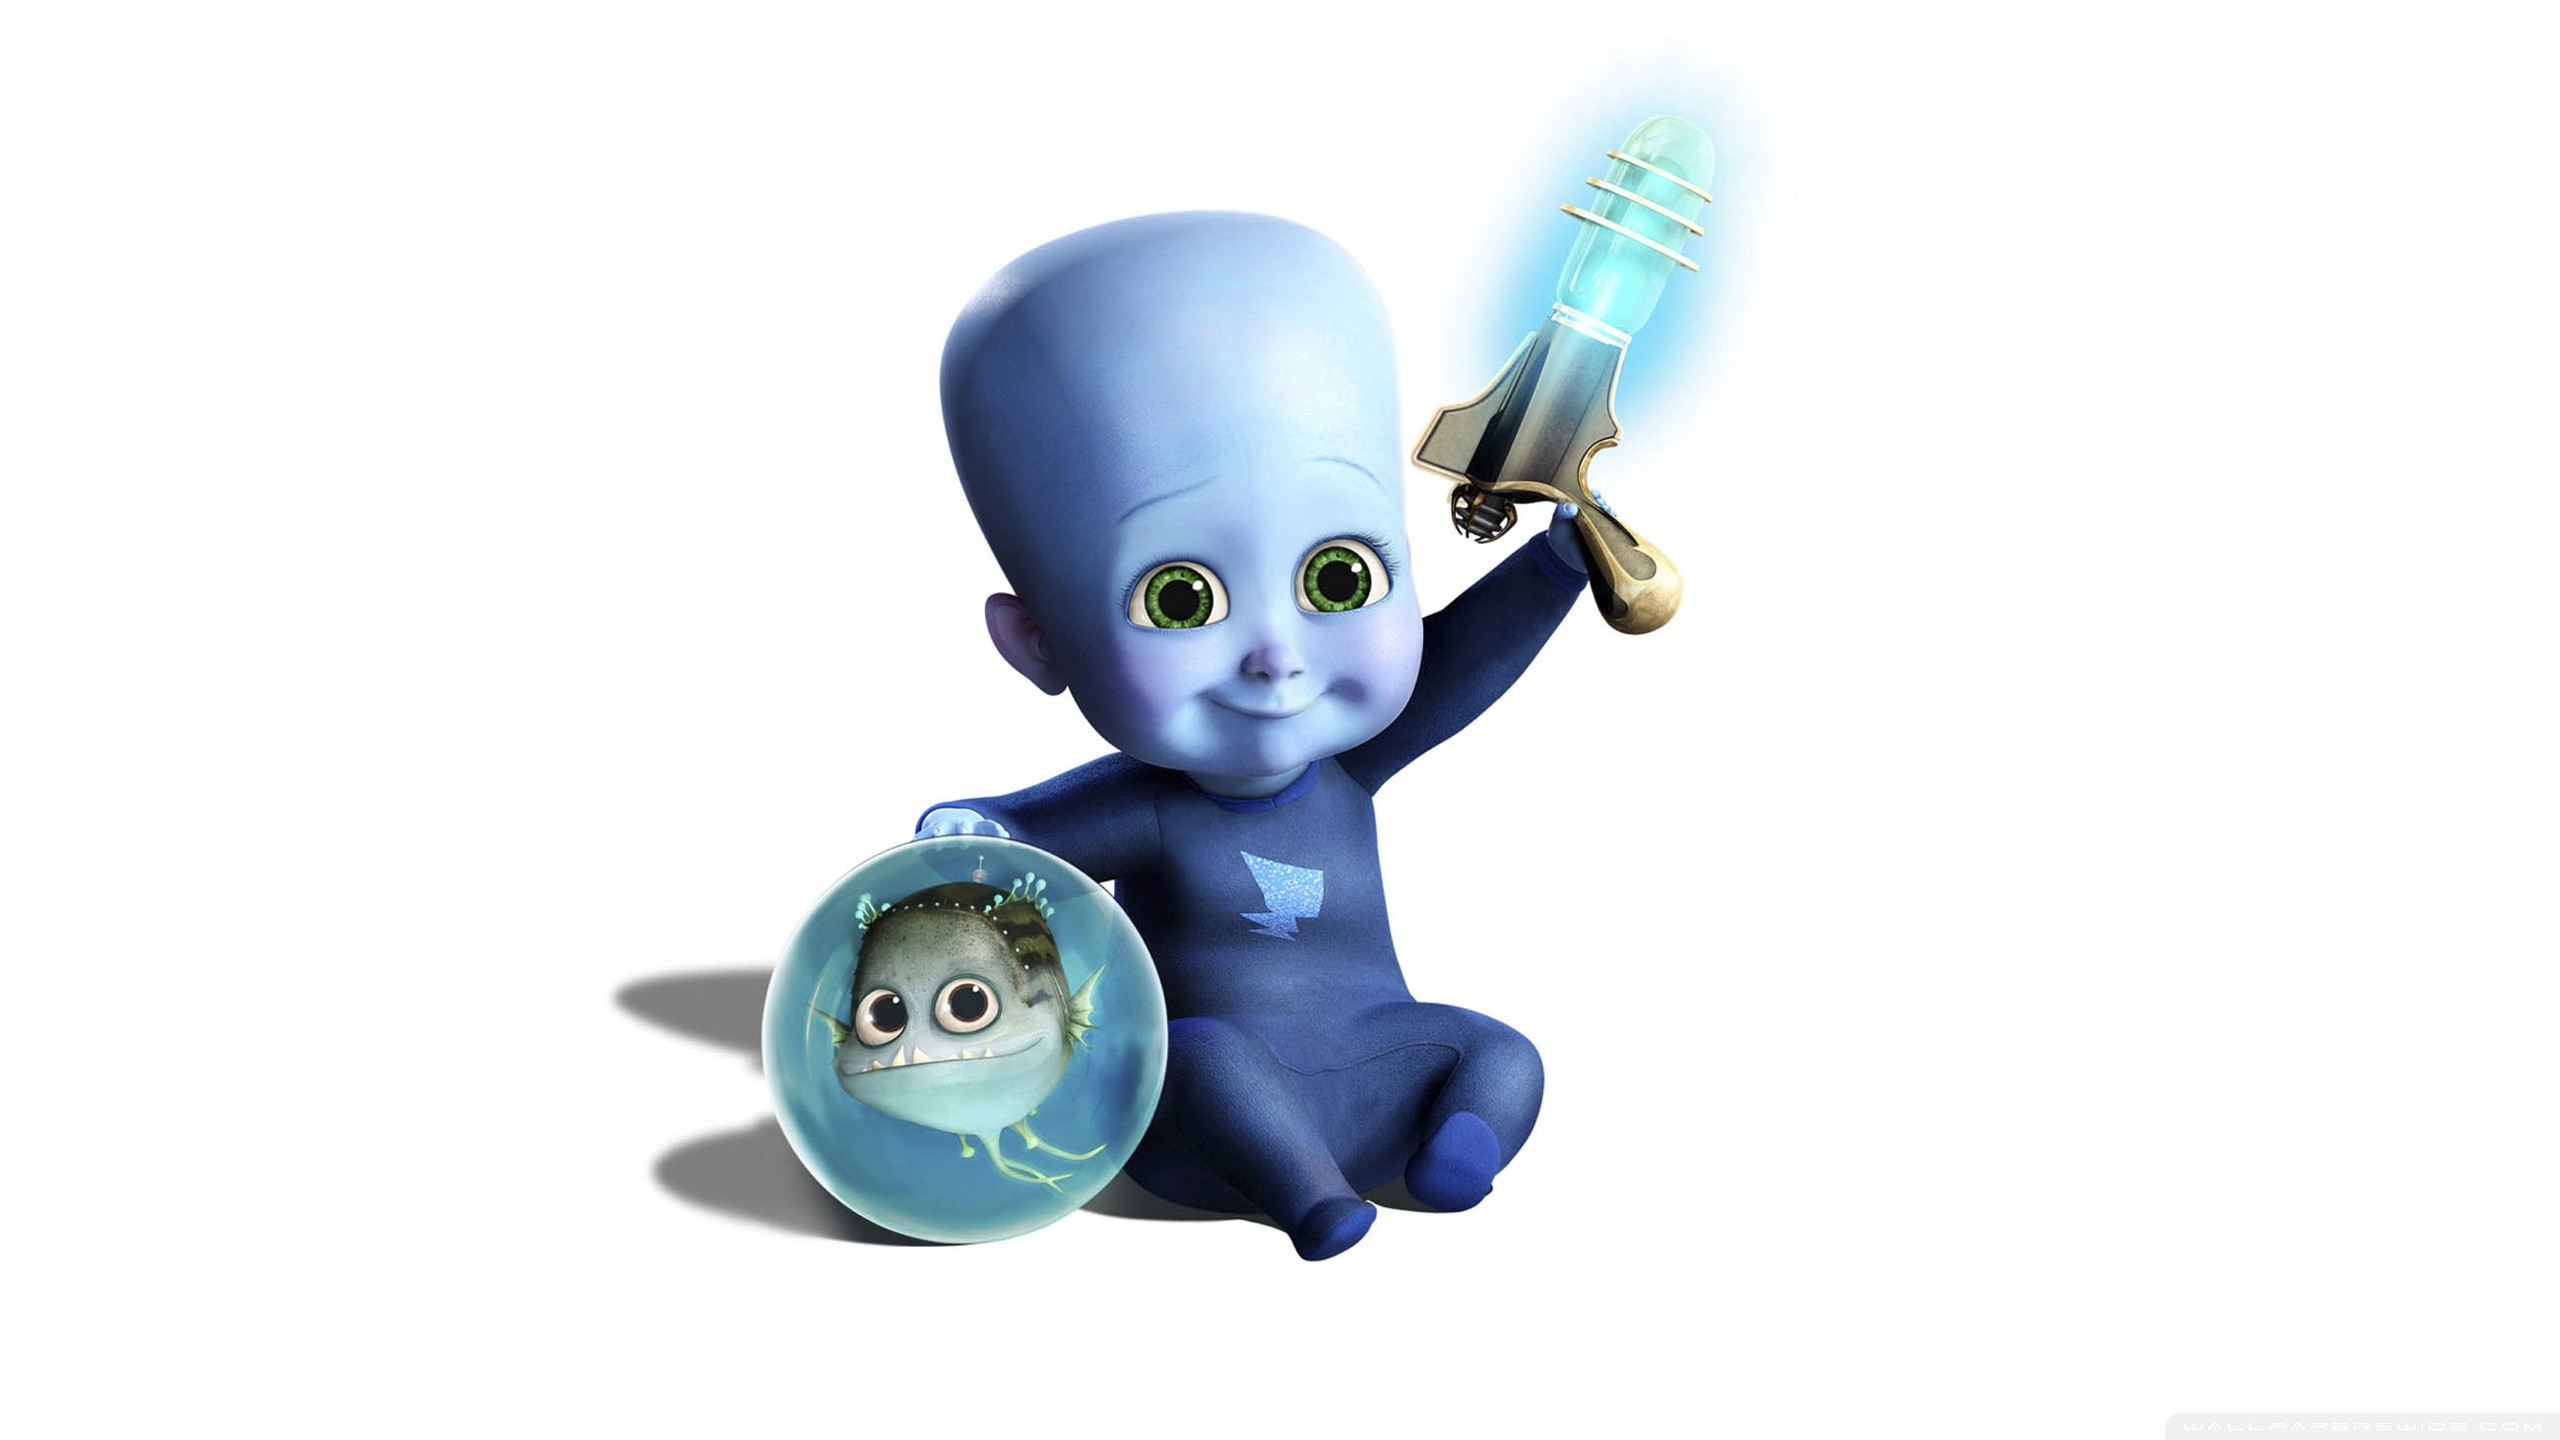 General 2560x1440 Megamind movies animated movies 2010 (Year) digital art simple background